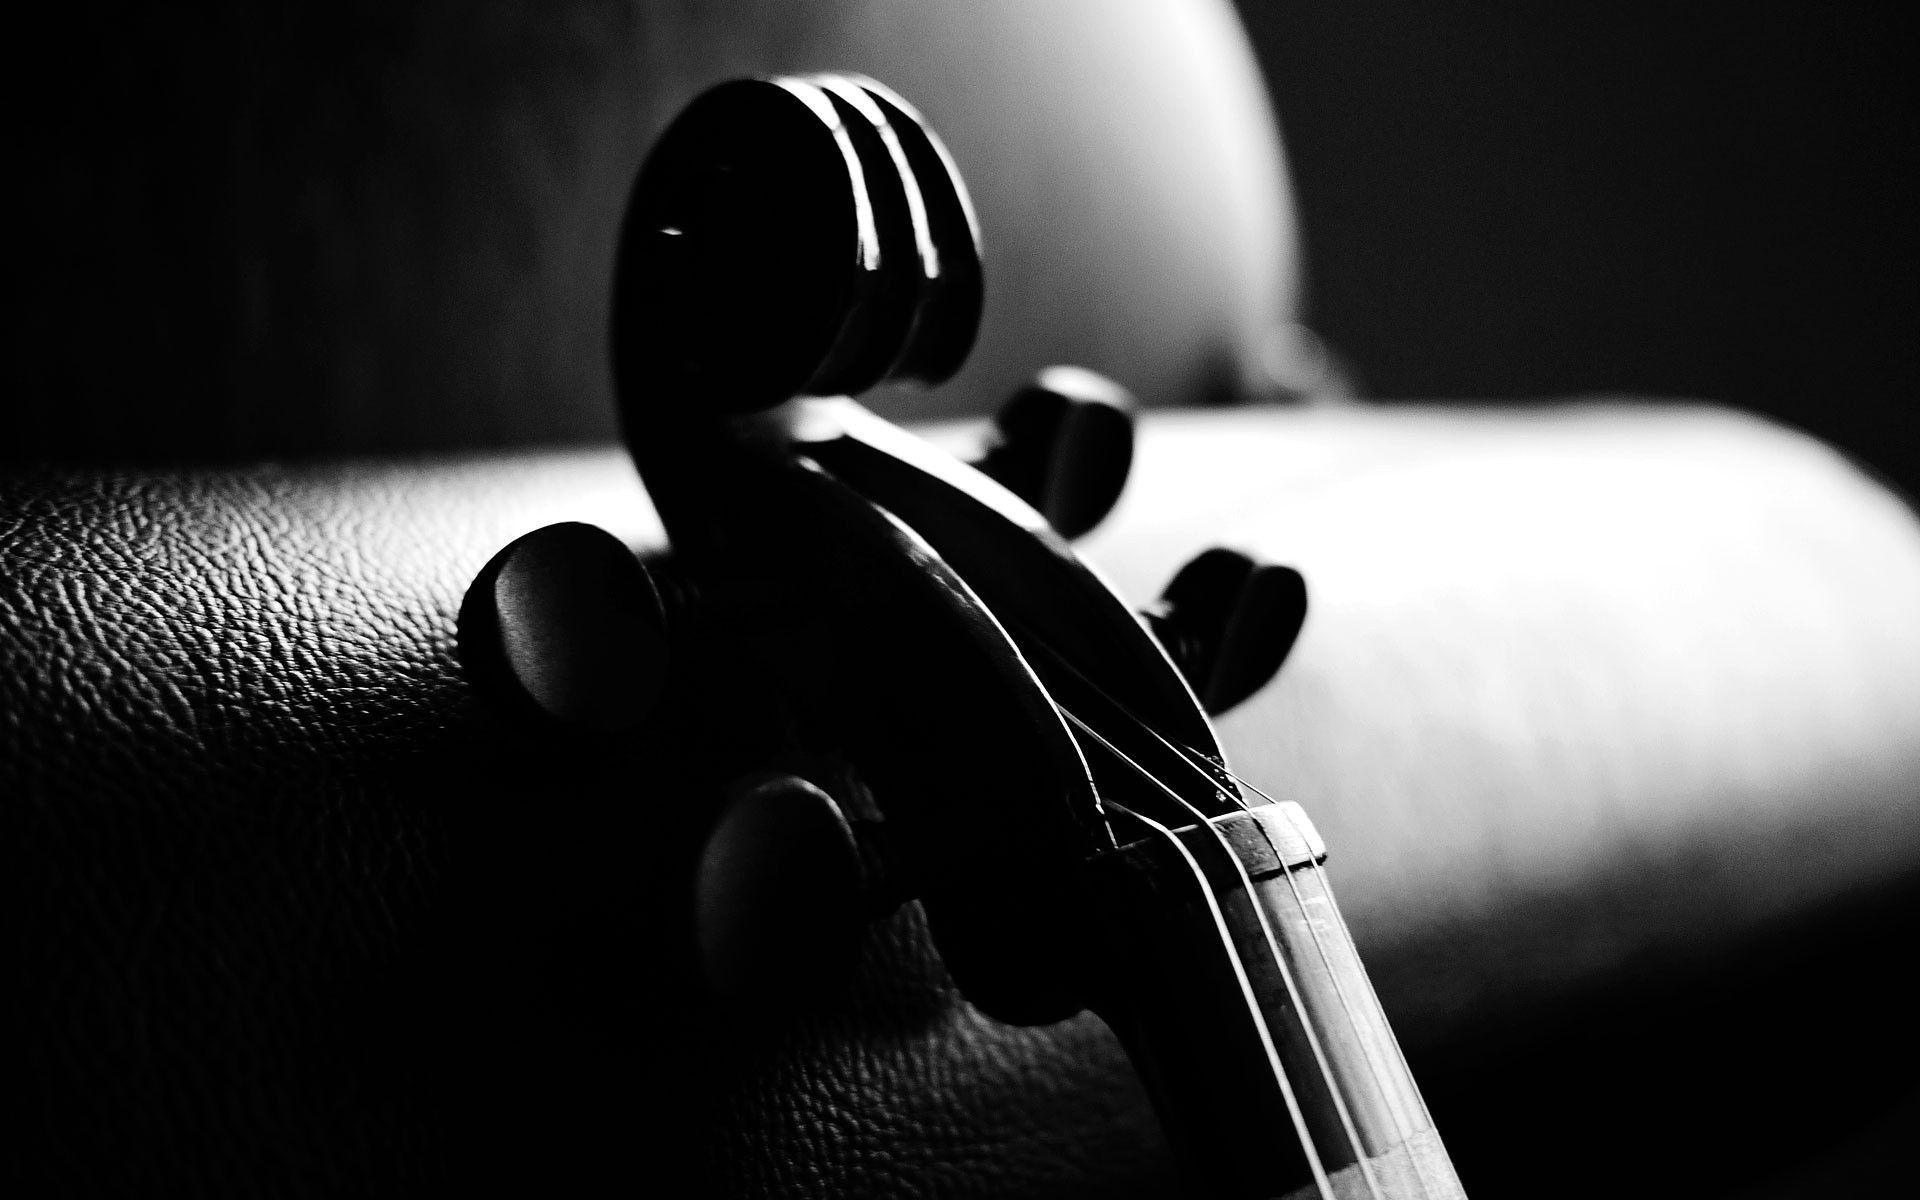 Violin Image Gallery Wallpaper Image For Mobile Phones High Quality